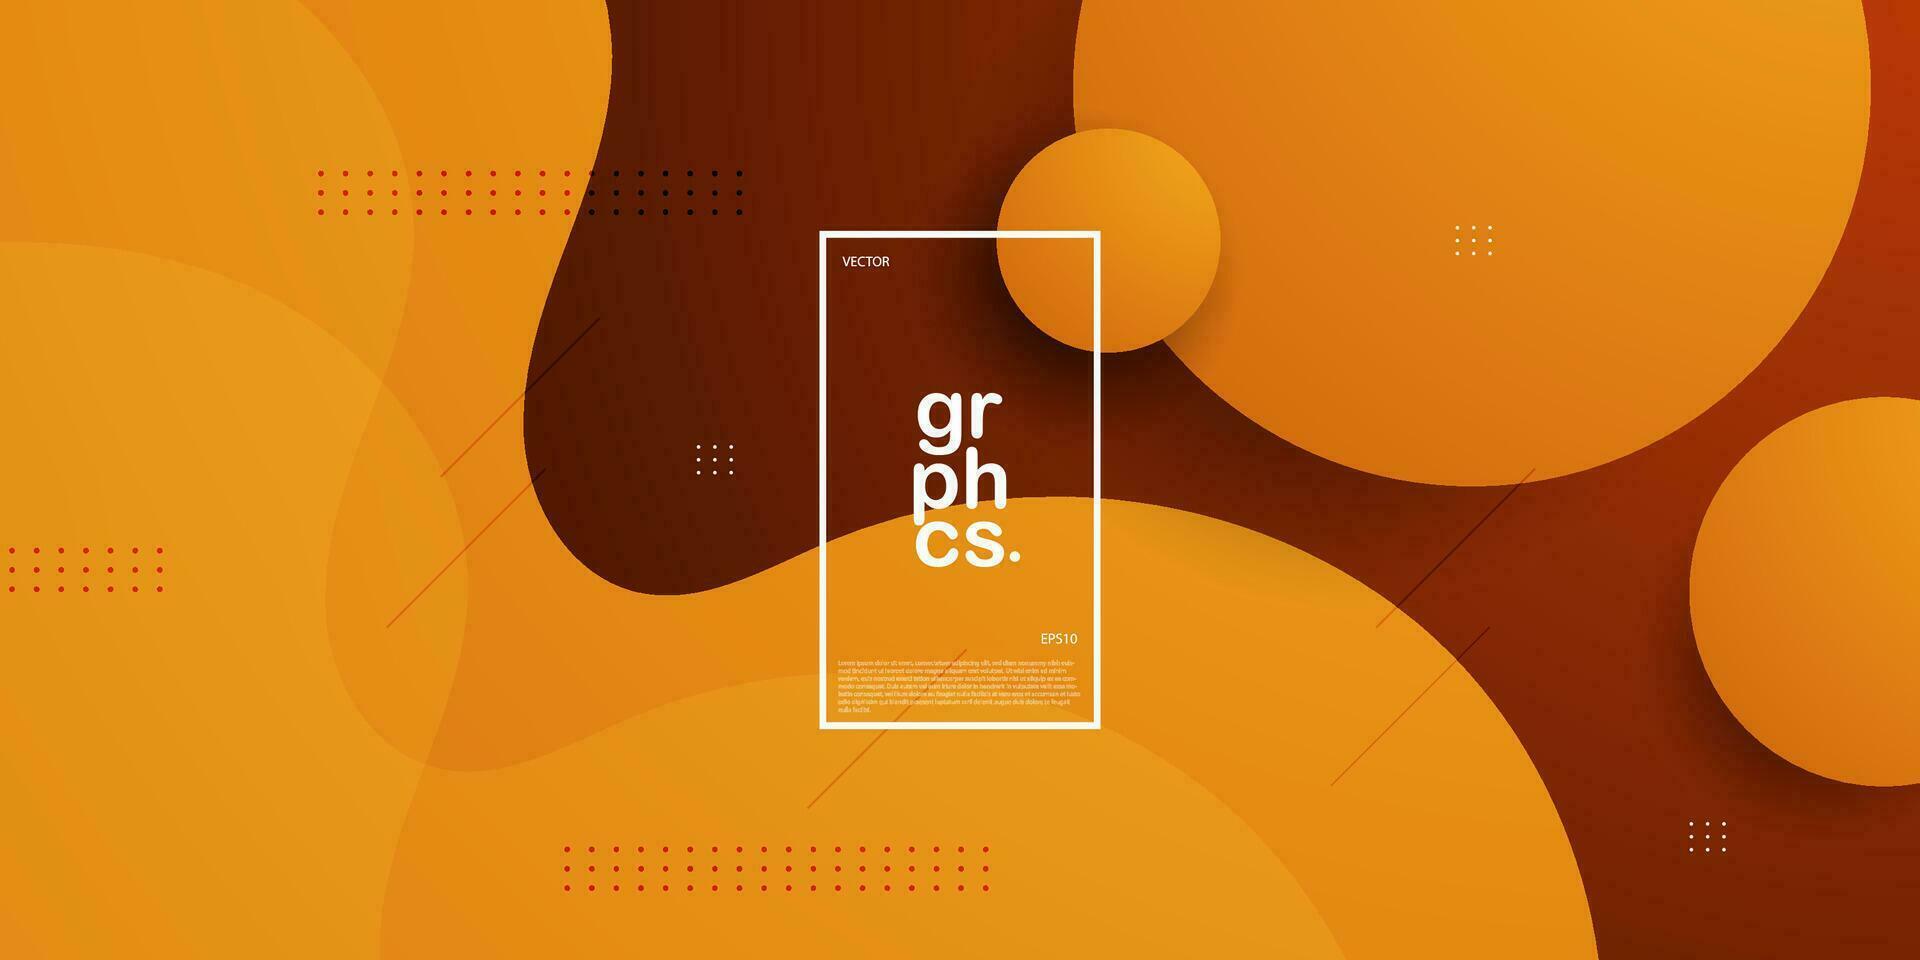 Minimal geometric brown and orange color with lines gradient background. Simple and cool design for display product ad website template wallpaper poster. Eps10 vector